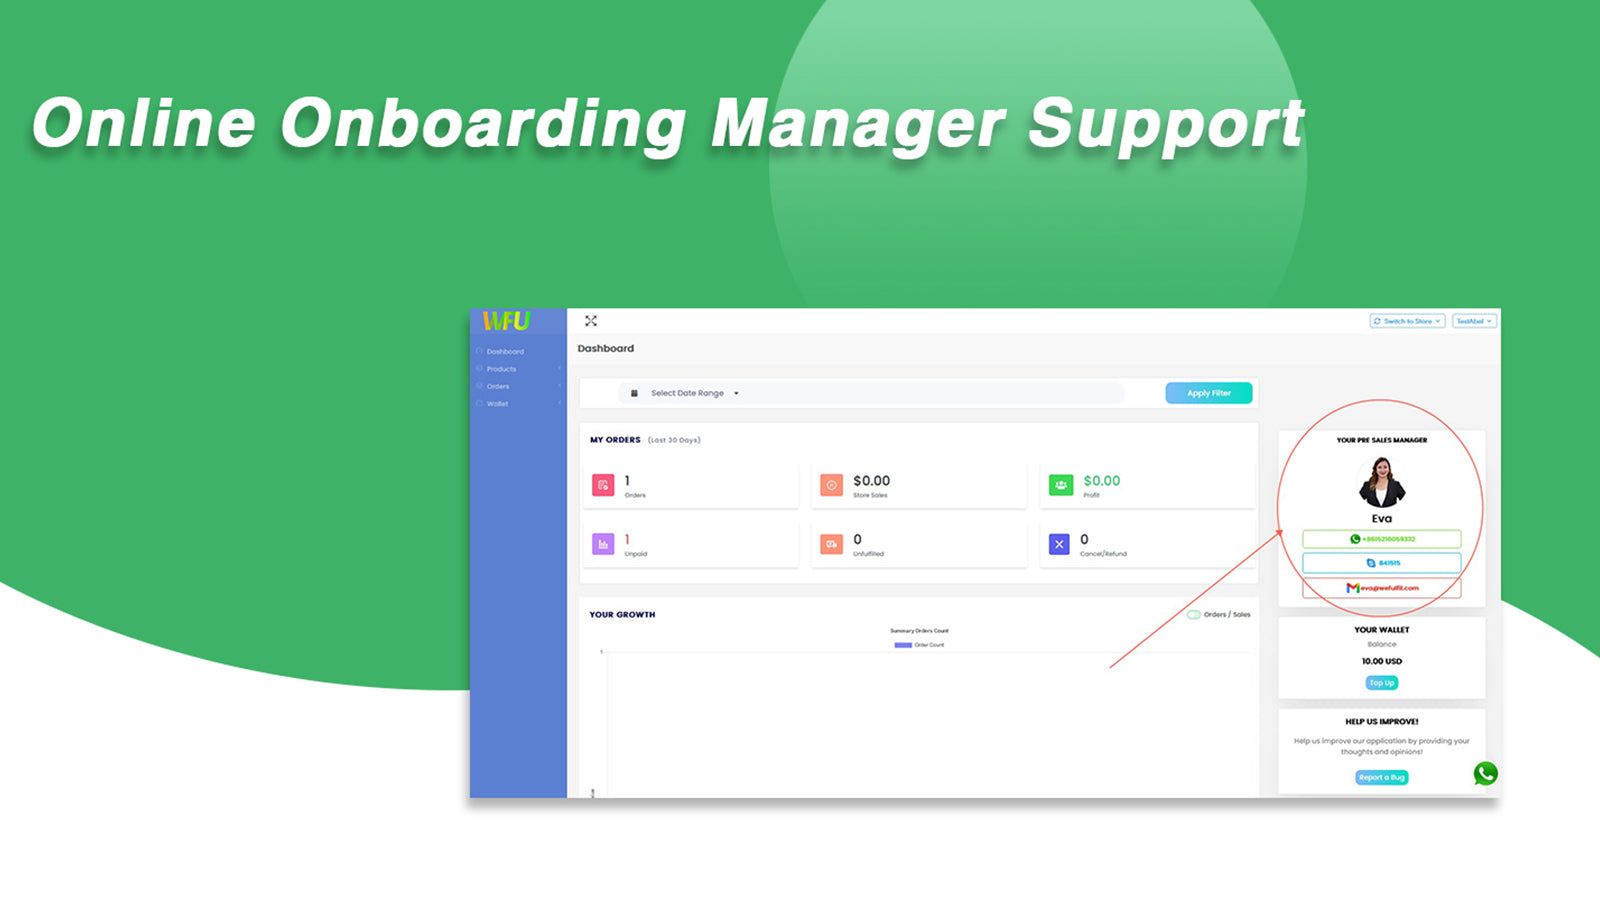 Online Onboarding Manager Support